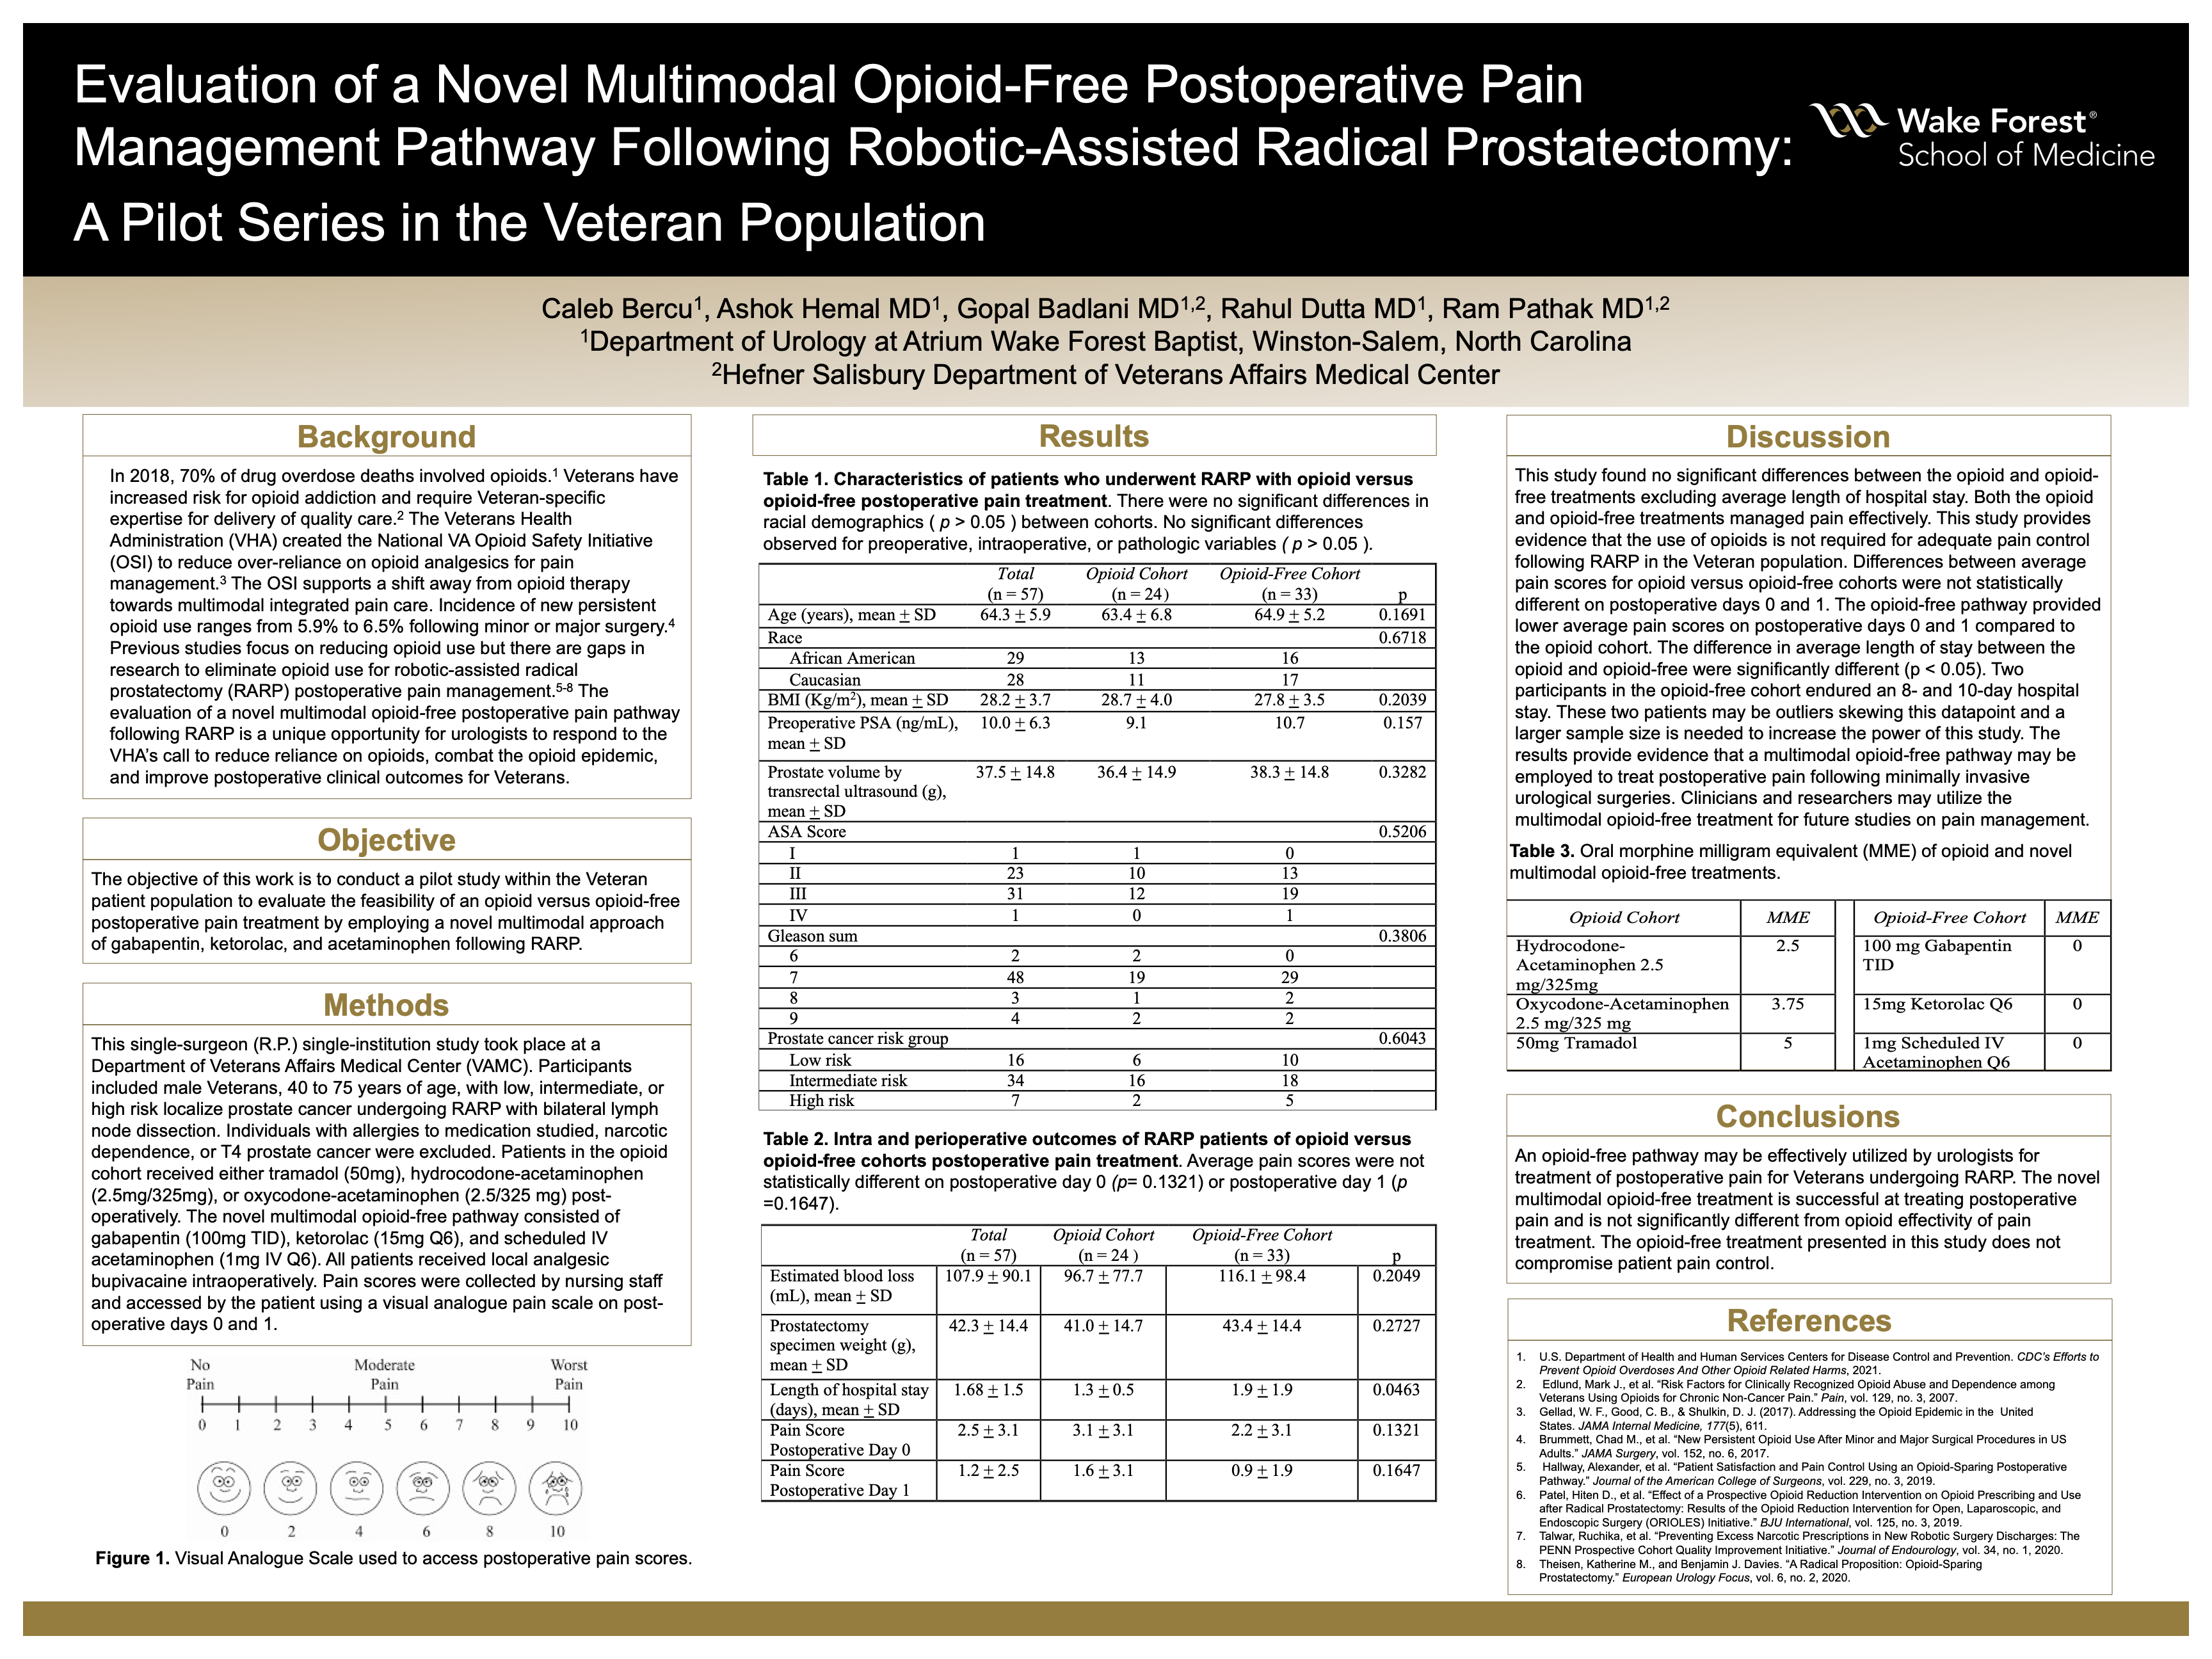 Showcase Image for Evaluation of a Novel Multimodal Opioid-Free Postoperative Pain Management Pathway Following Robotic-Assisted Radical Prostatectomy: A Pilot Series in the Veteran Population